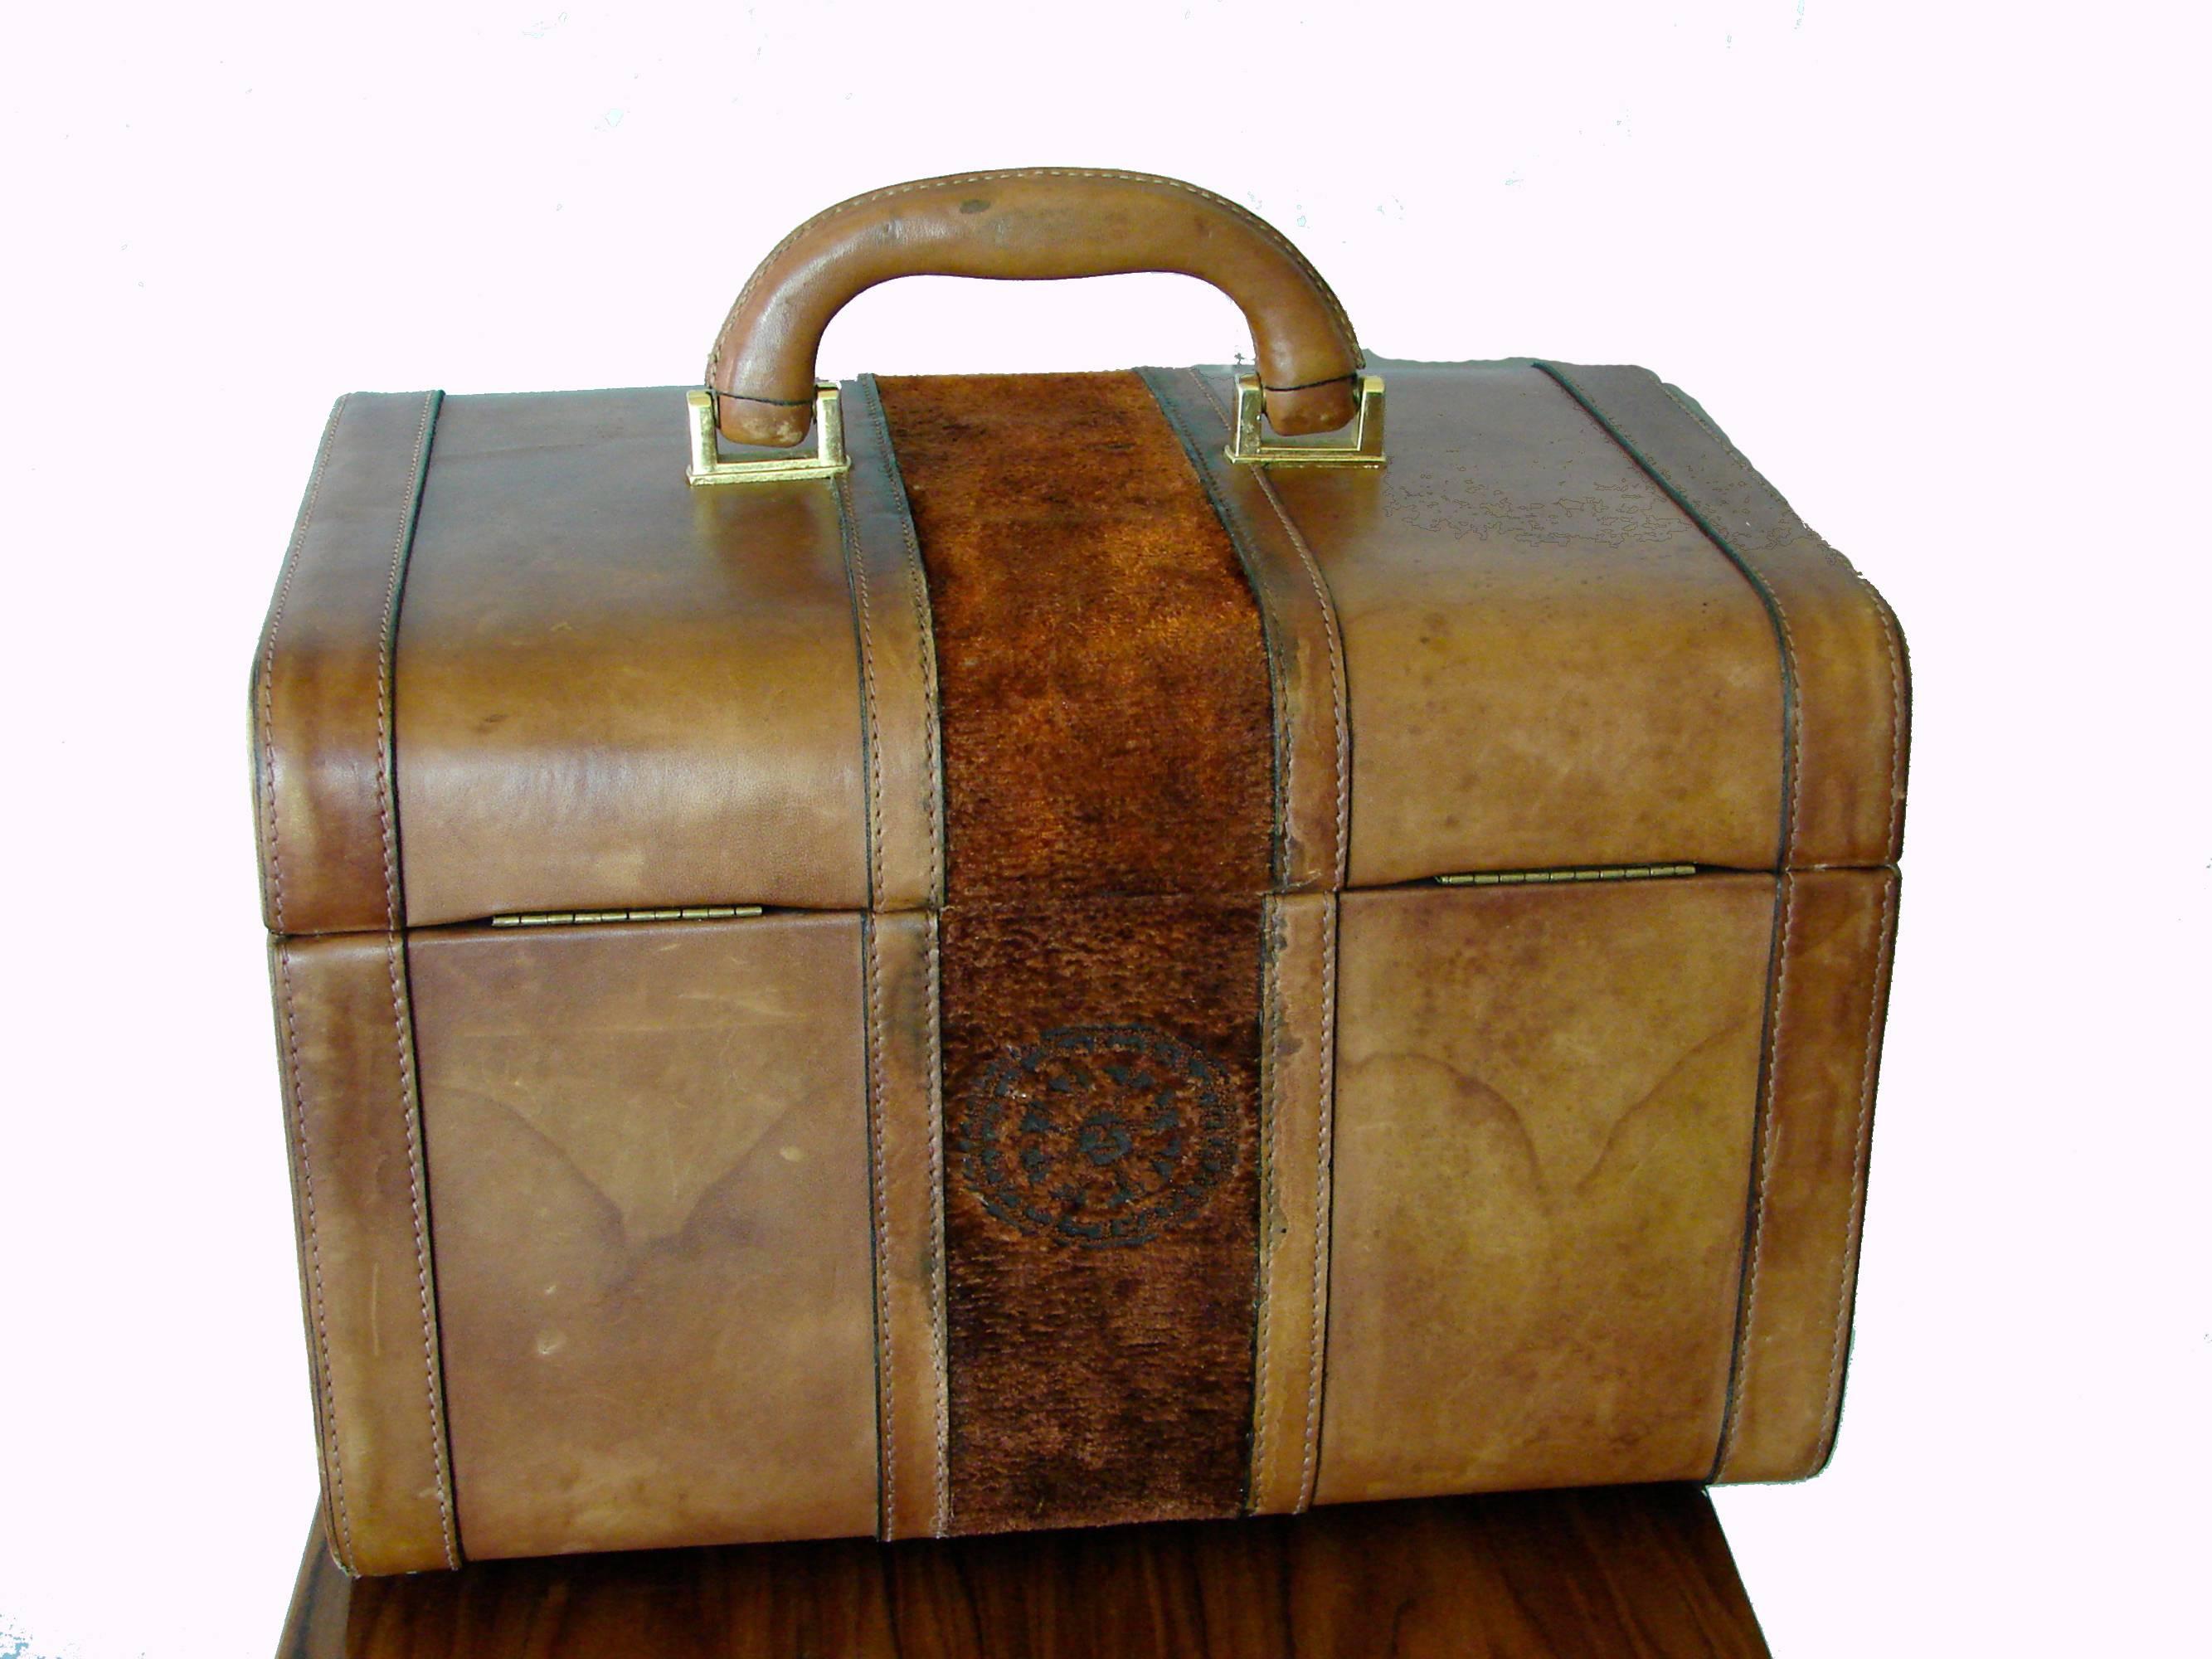 A rare toiletry or train case designed by Giuliana Camerino in the late 1970s.  Made from saddle leather, it features an amber brown colored Soprarizzo velvet center embossed with the Roberta di Camerino insignia.  The interior is lined in black